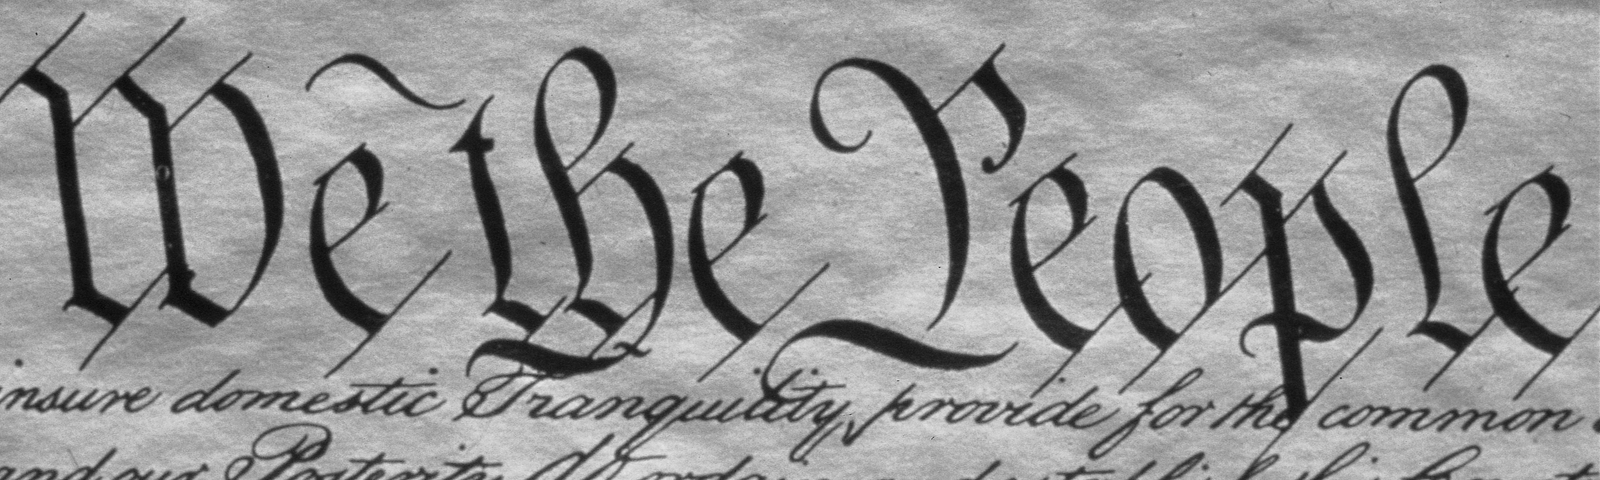 An image of the first few lines of the Constitution of the United States.